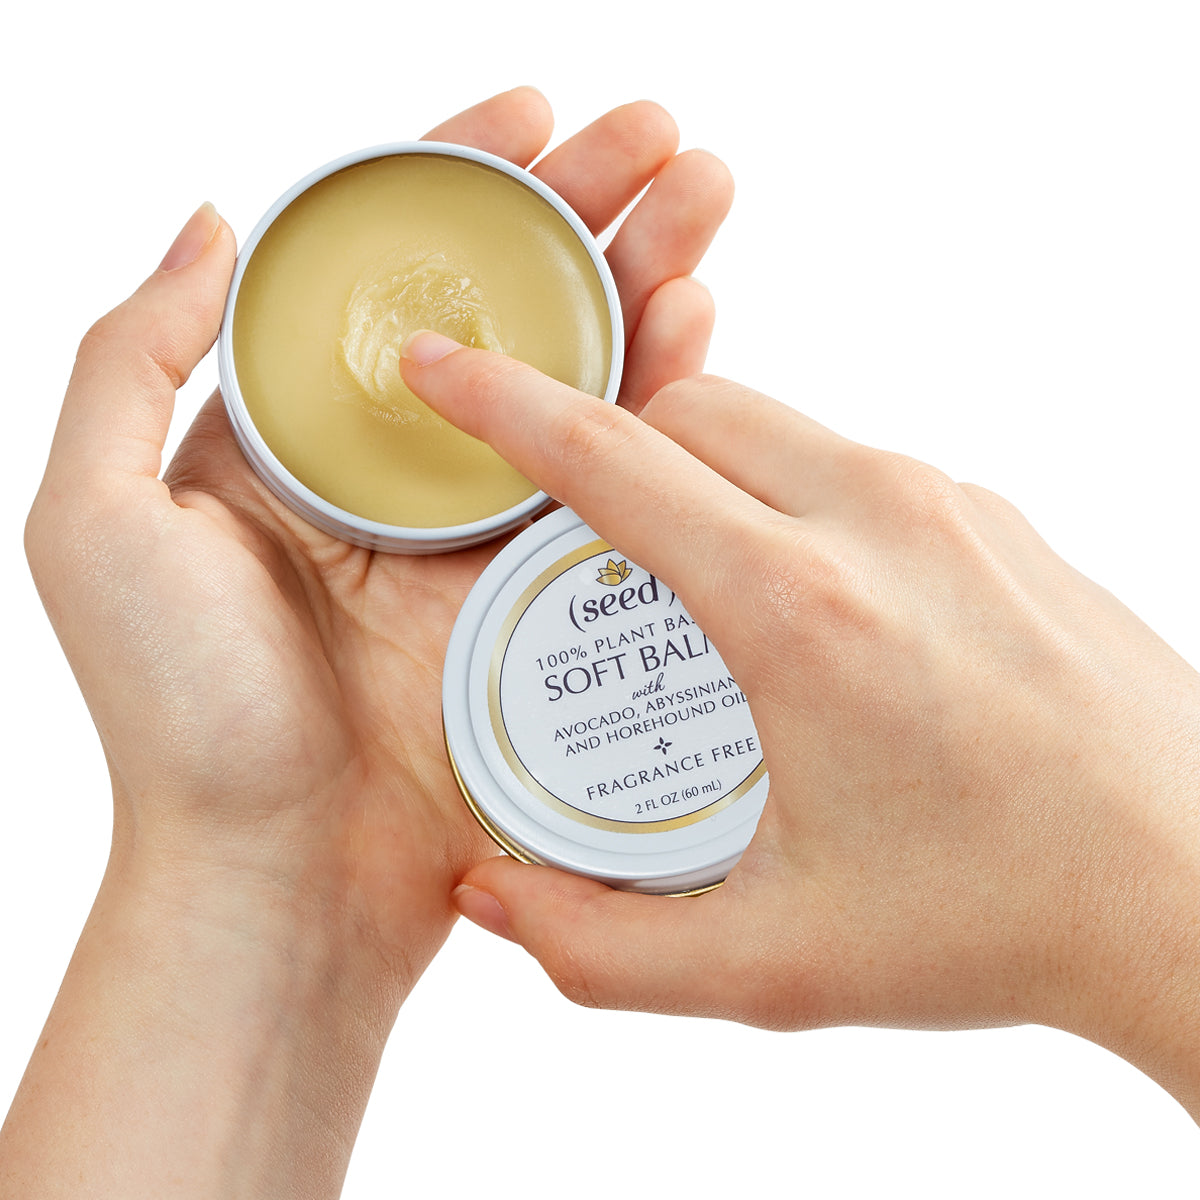 Seed Soft Balm in use, open lid, shown in fragrance free 2 oz tin